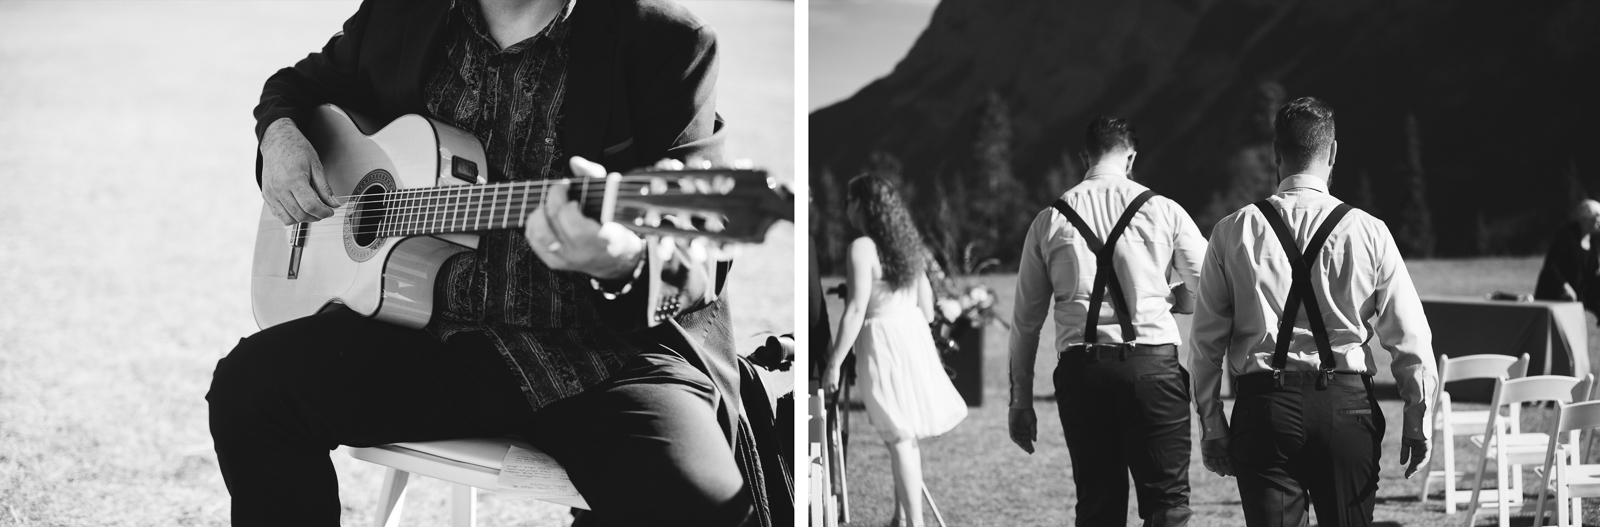 45-willow_and_wolf_photography_stephanie_and_kyle_banff_wedding_blogatp_8284-edit